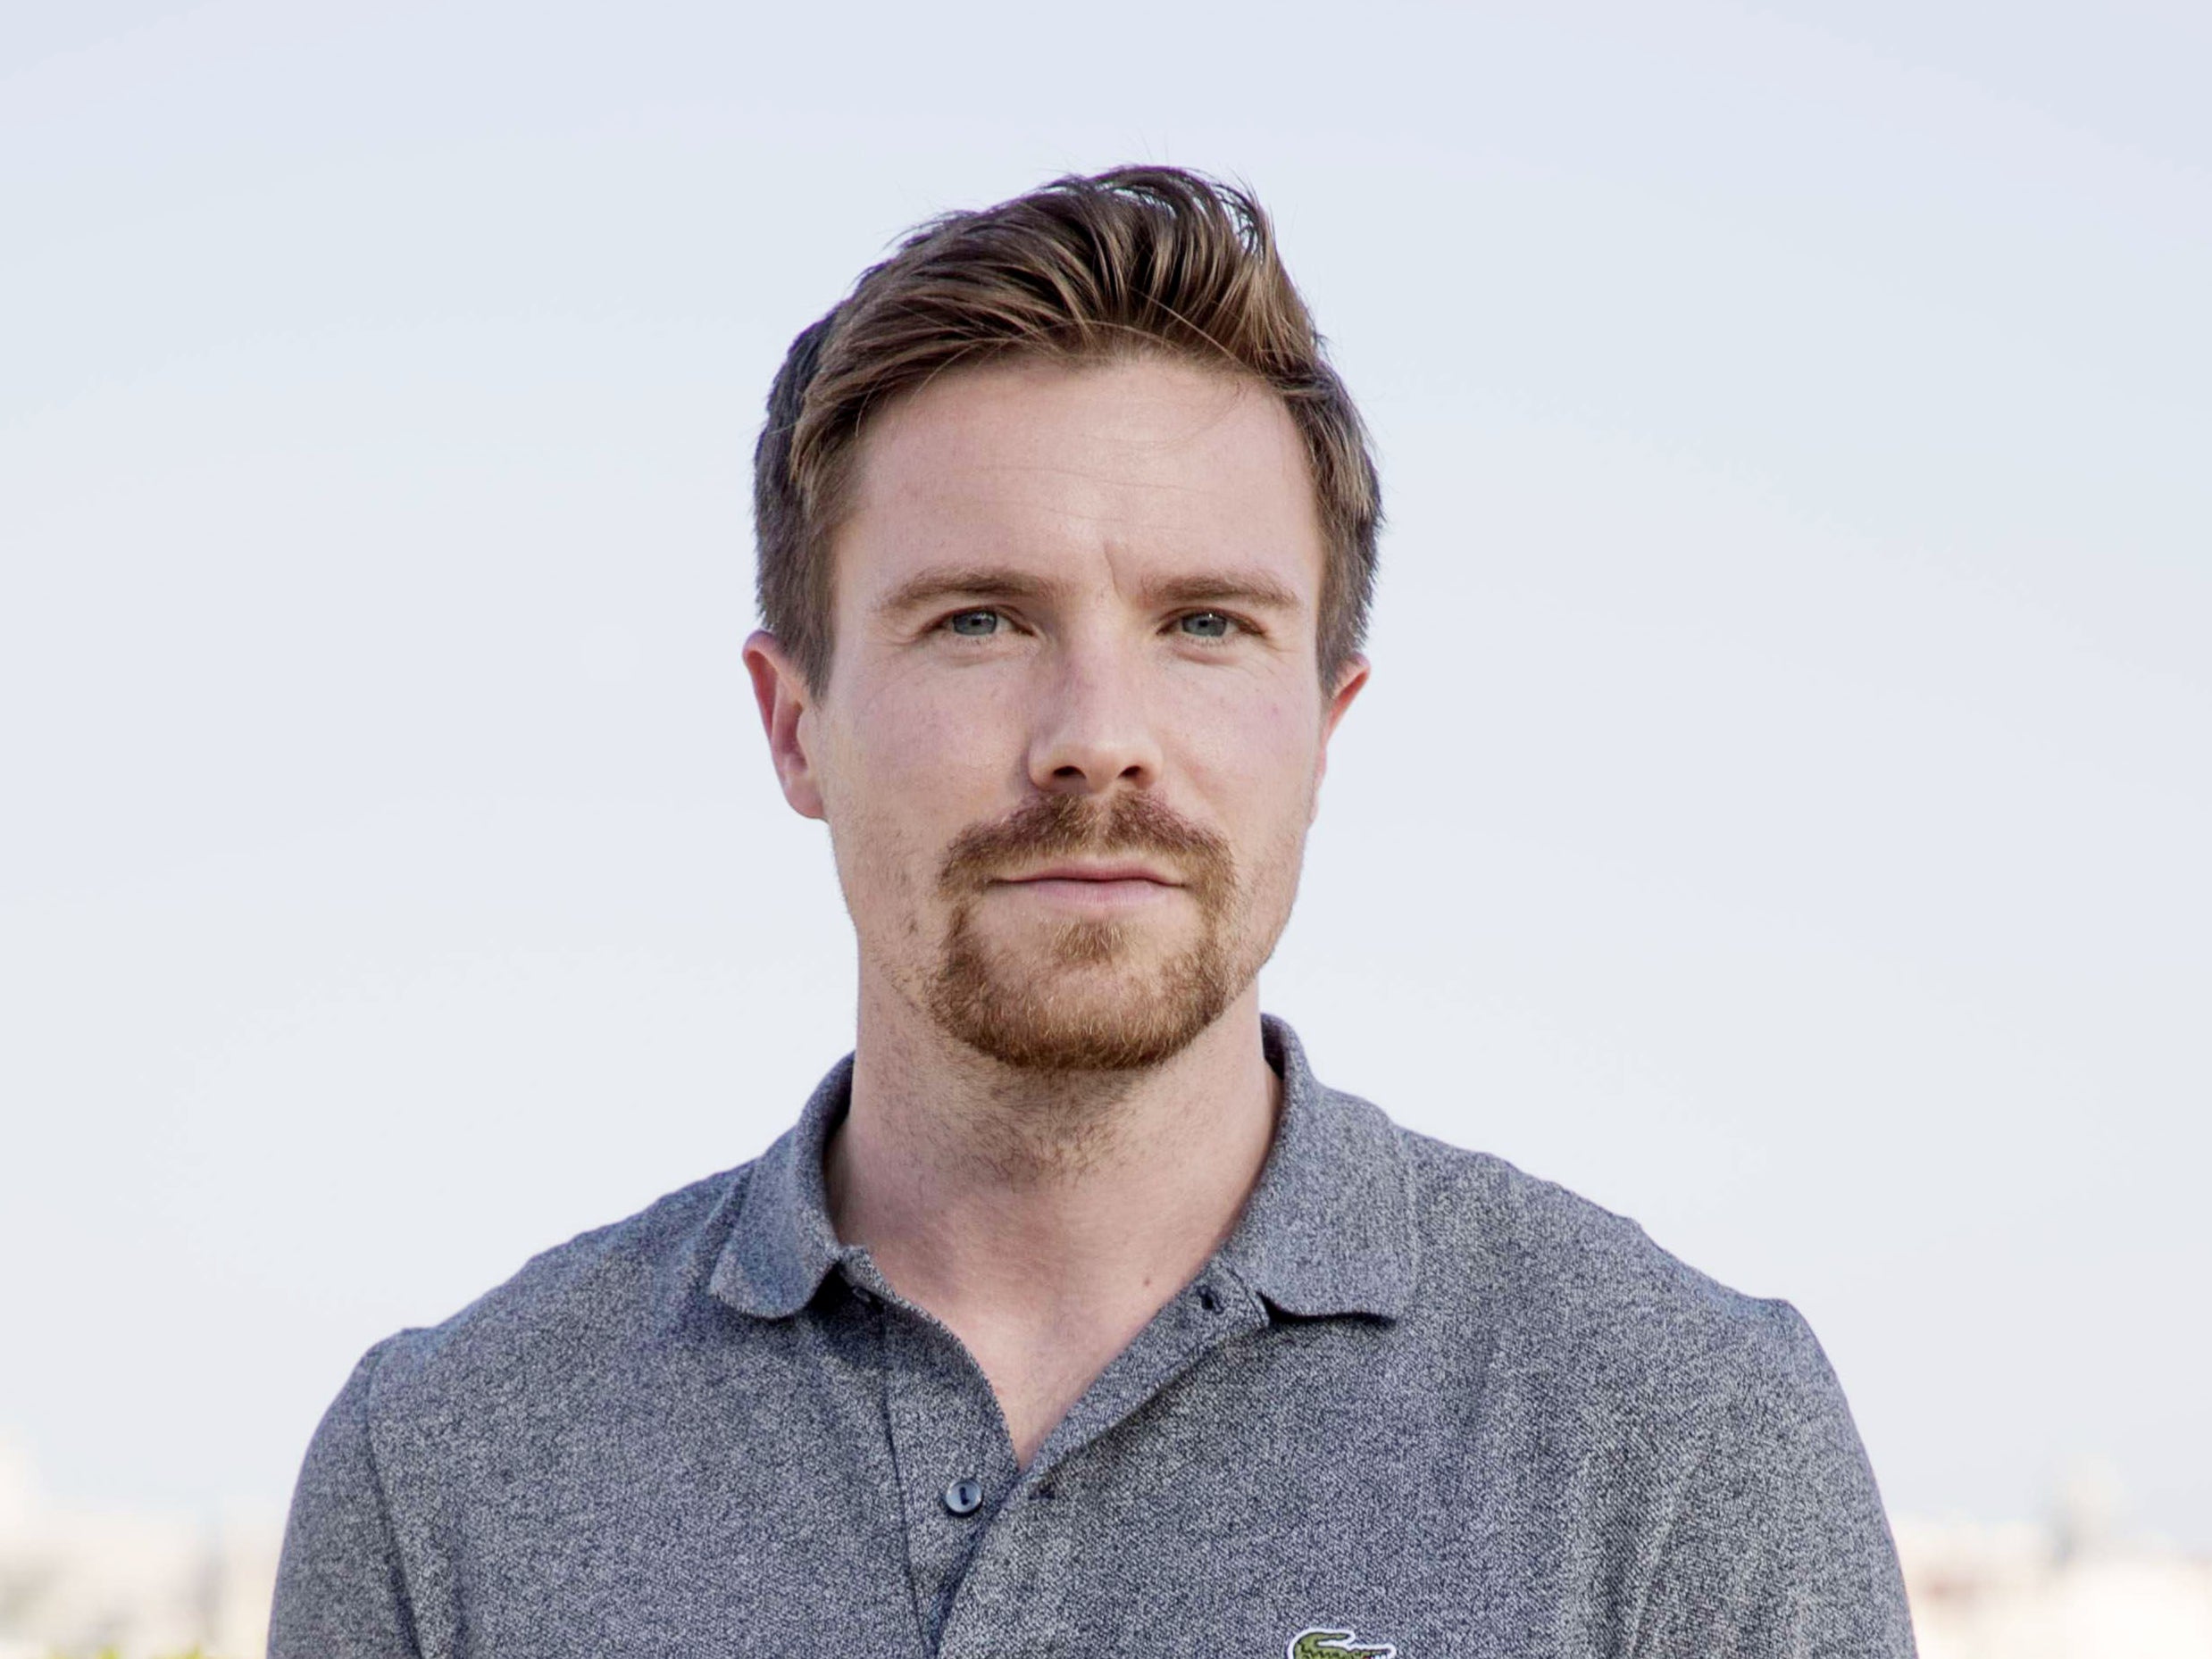 ‘Porn is part of our lives whether we directly consume it or not’: Joe Dempsie speaks about British drama ‘Adult Material’ and his views on the divisive ‘Game of Thrones’ finale